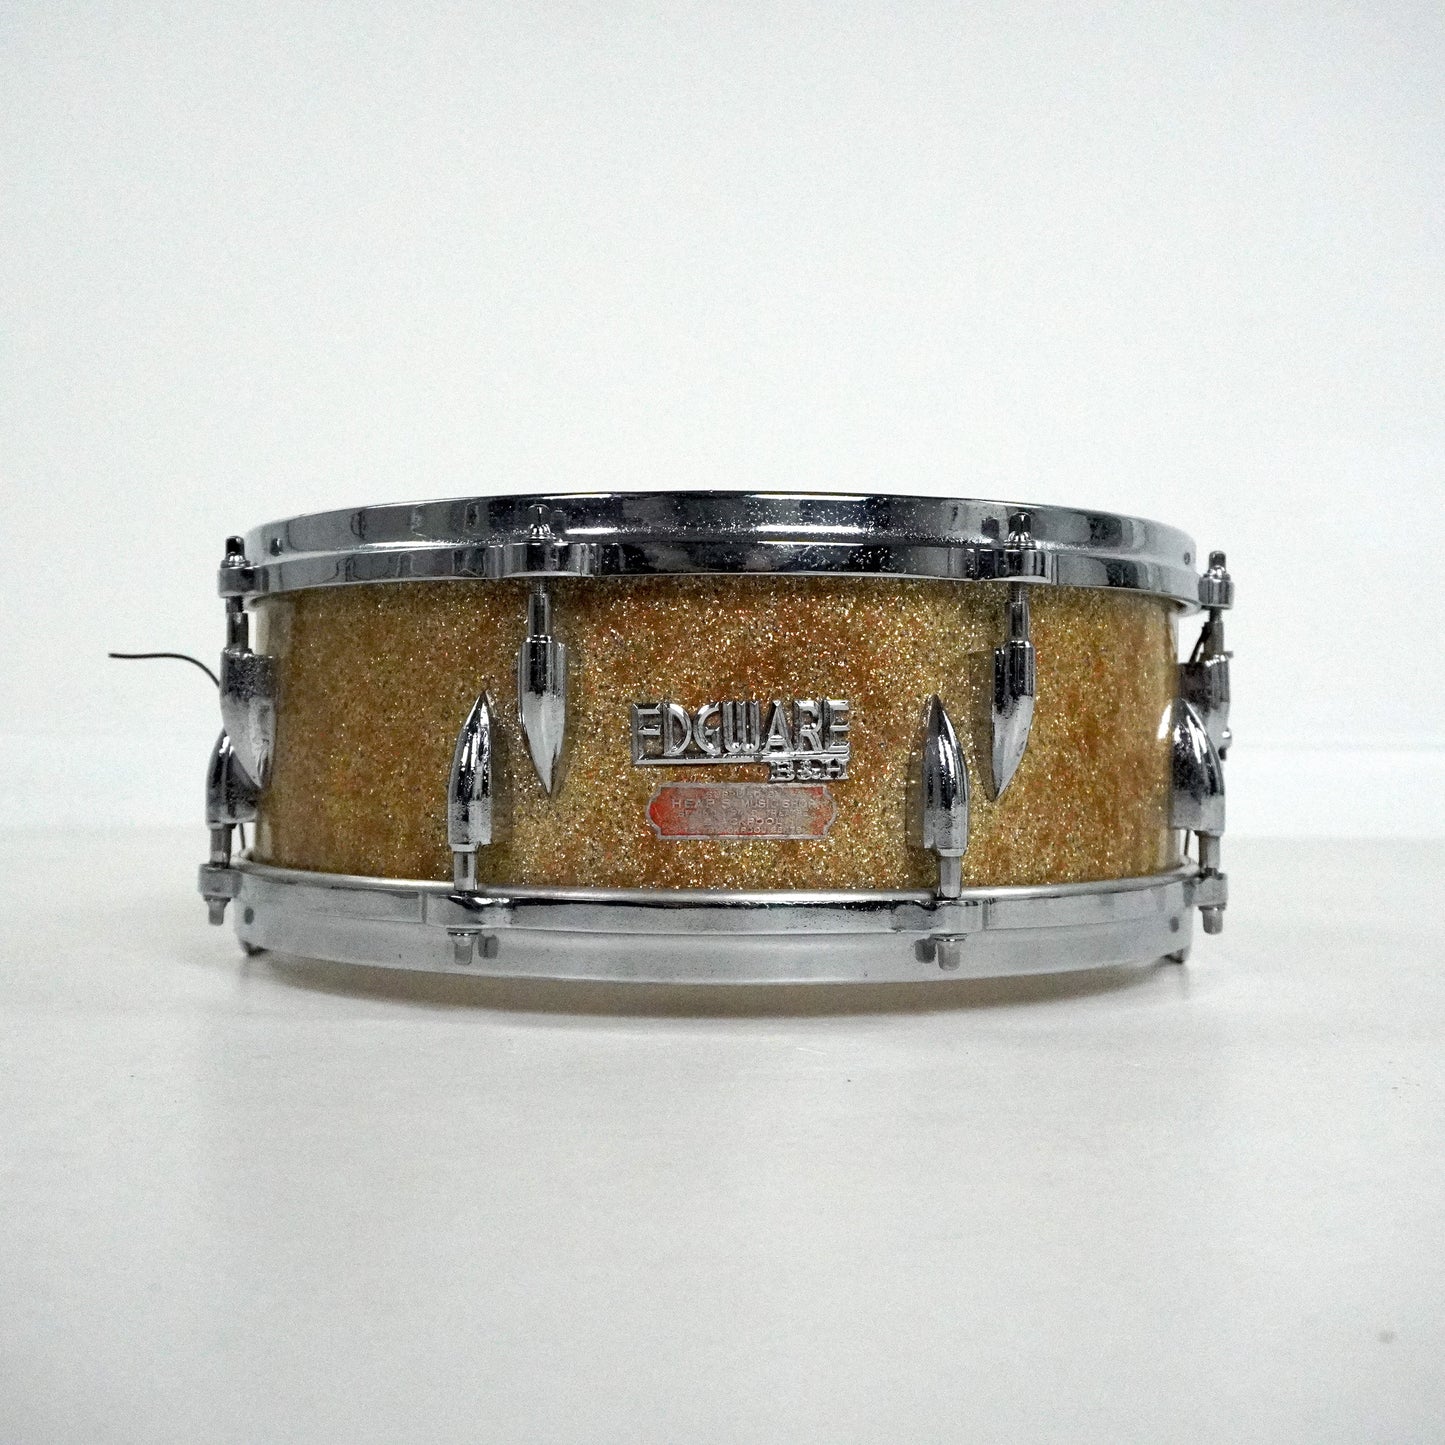 Vintage Edgware B&H 14" x 5" Snare in Gold Sparkle